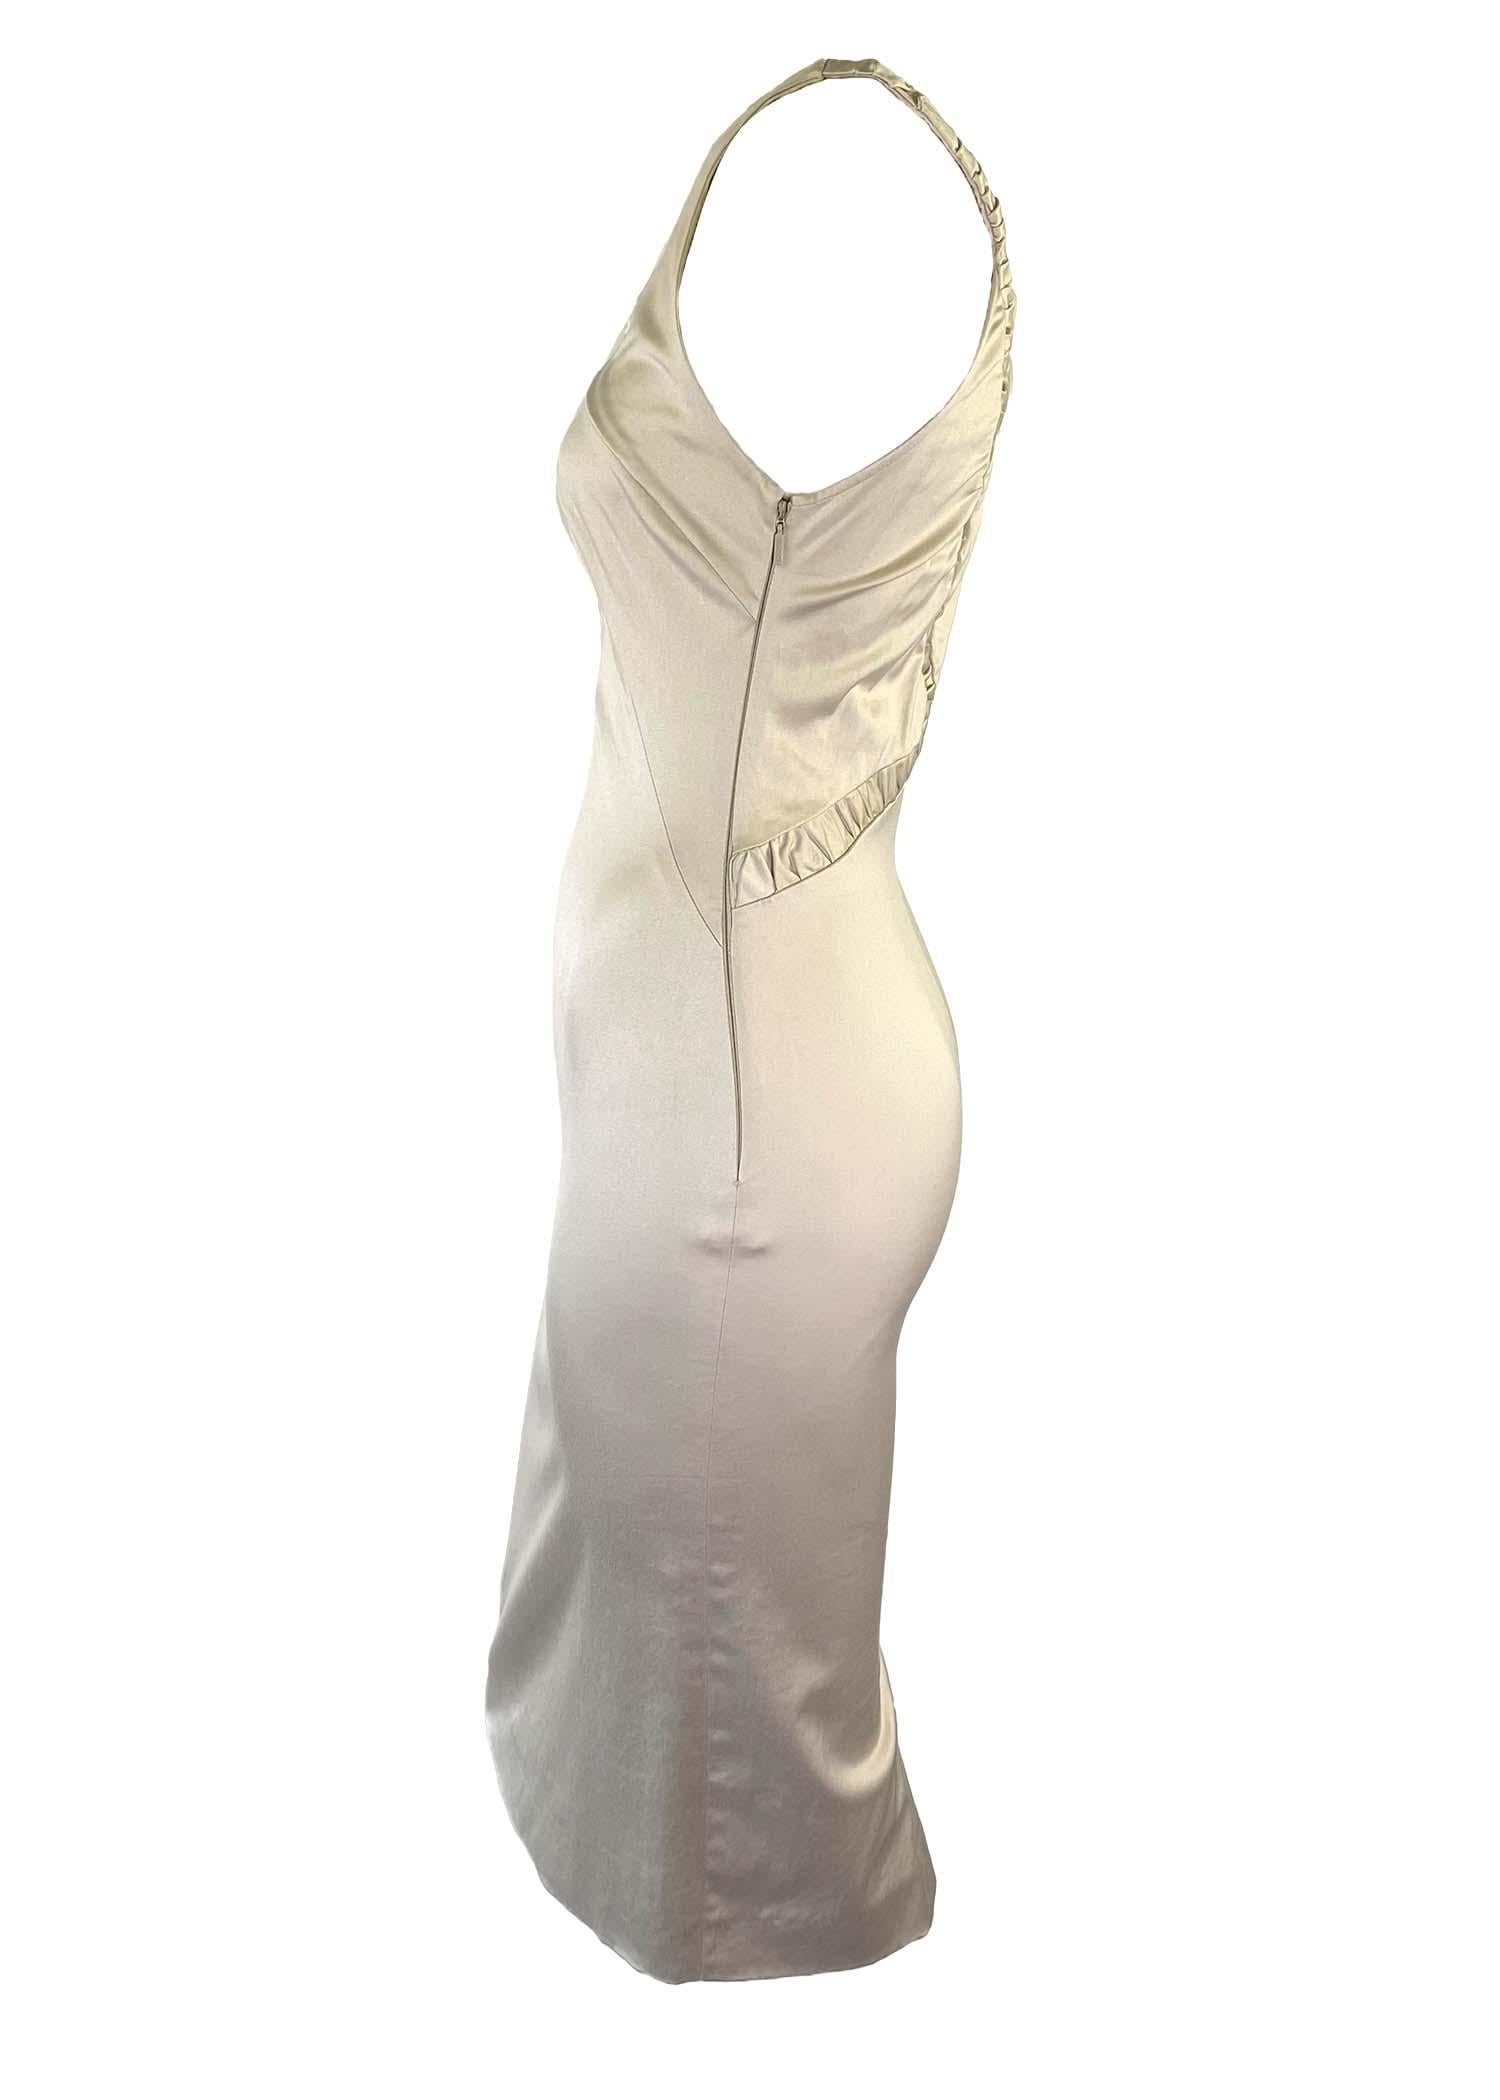 Presenting a stunning creme color sleeveless Gucci dress, designed by Tom Ford. This new with tags dress is from the Fall/Winter 2004 collection and features a peekaboo opening at the bust with ruched accents and skirt slit at the back. This